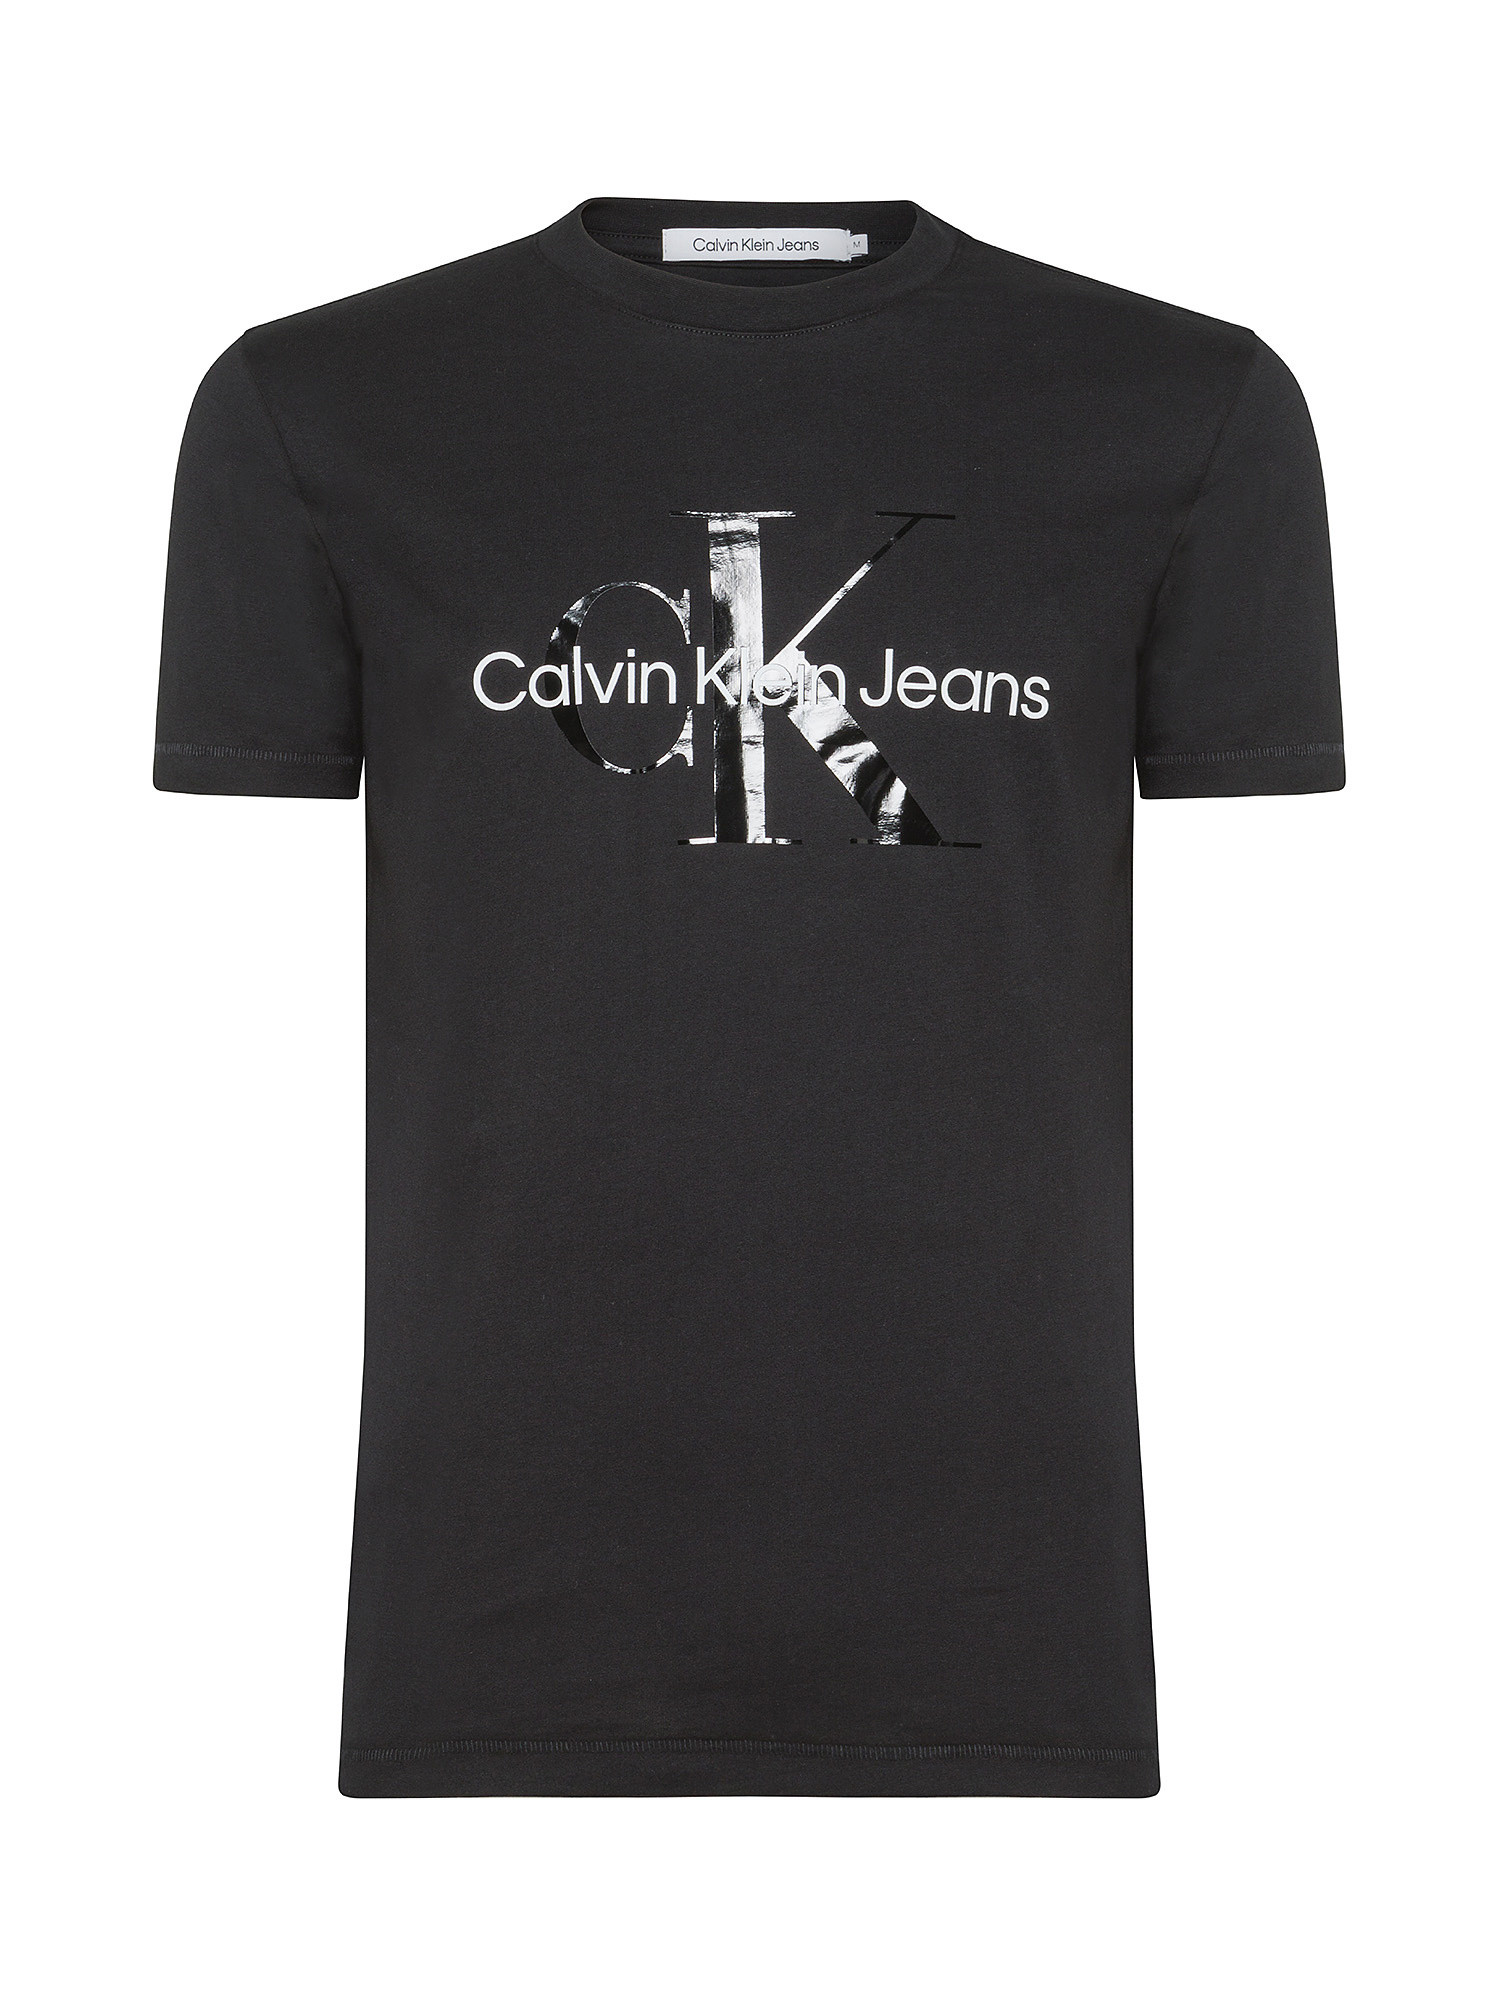 Calvin Klein Jeans -  Cotton T-shirt with logo, Black, large image number 0